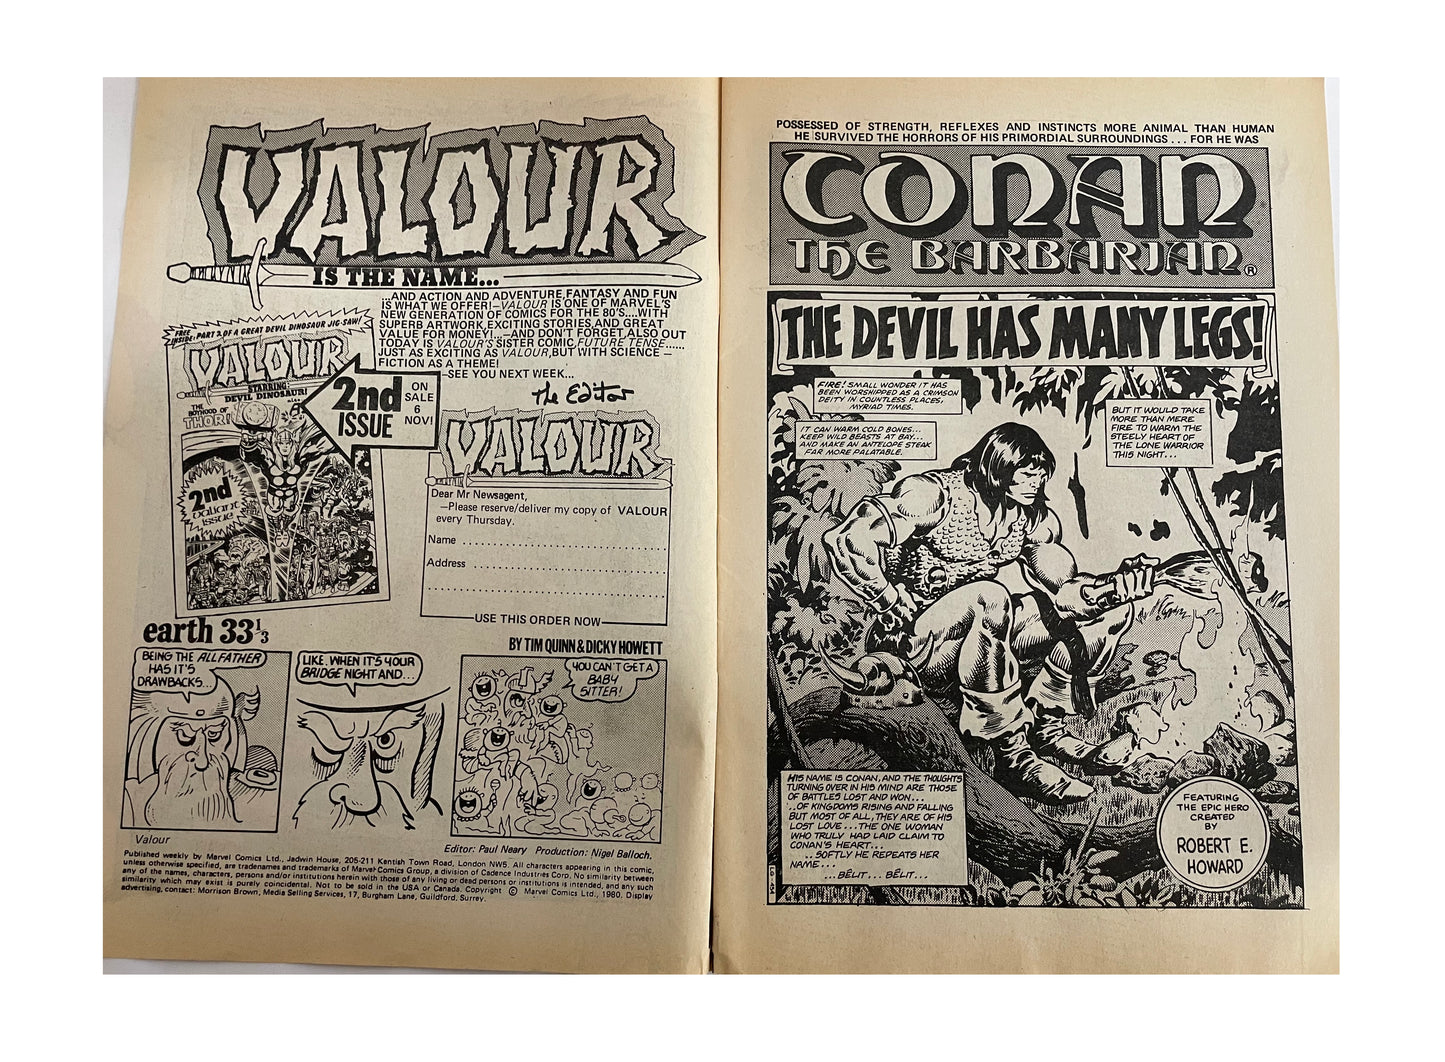 Vintage 1980 Valour Weekly Comic Magazine Number 1 - Fantastic First Issue - With The Free Jigsaw - Nov 5th 1980 - Former Shop Stock